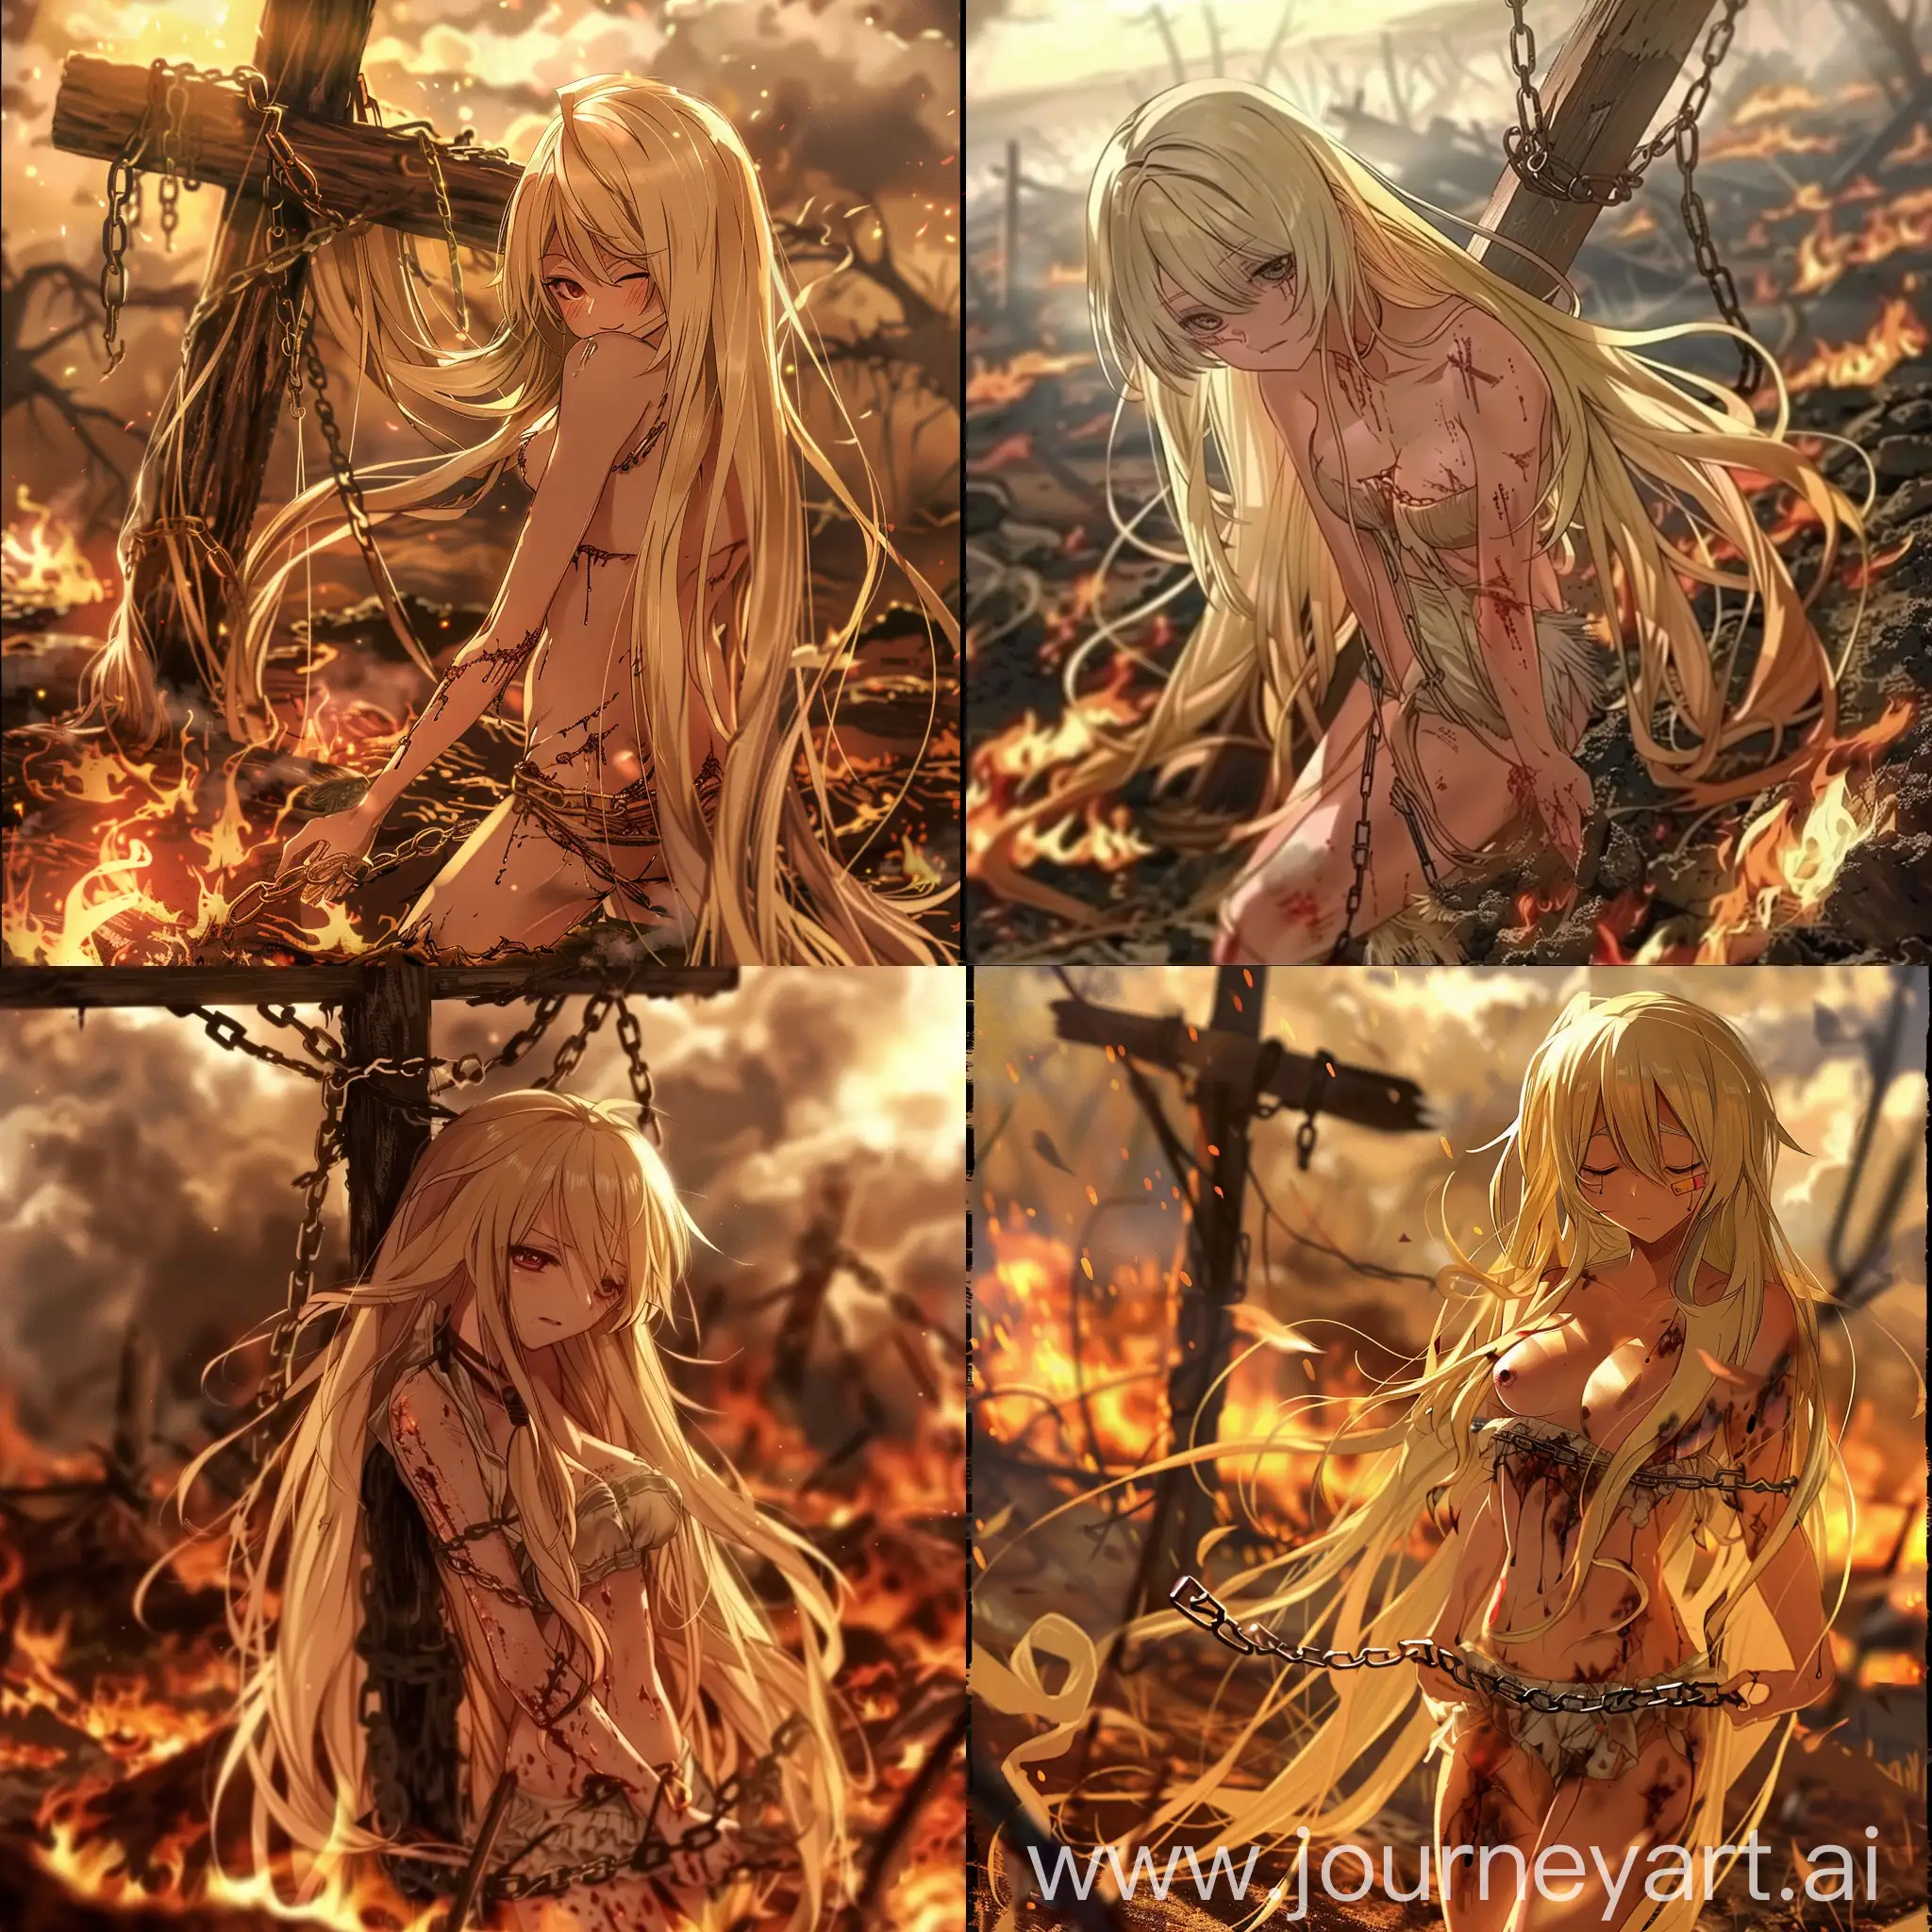 anime style, blonde woman with little to wear is looking down and chained to a cross like jesus, extremely long blonde hair covering the ground, burnt and scorched land, everything is burning,